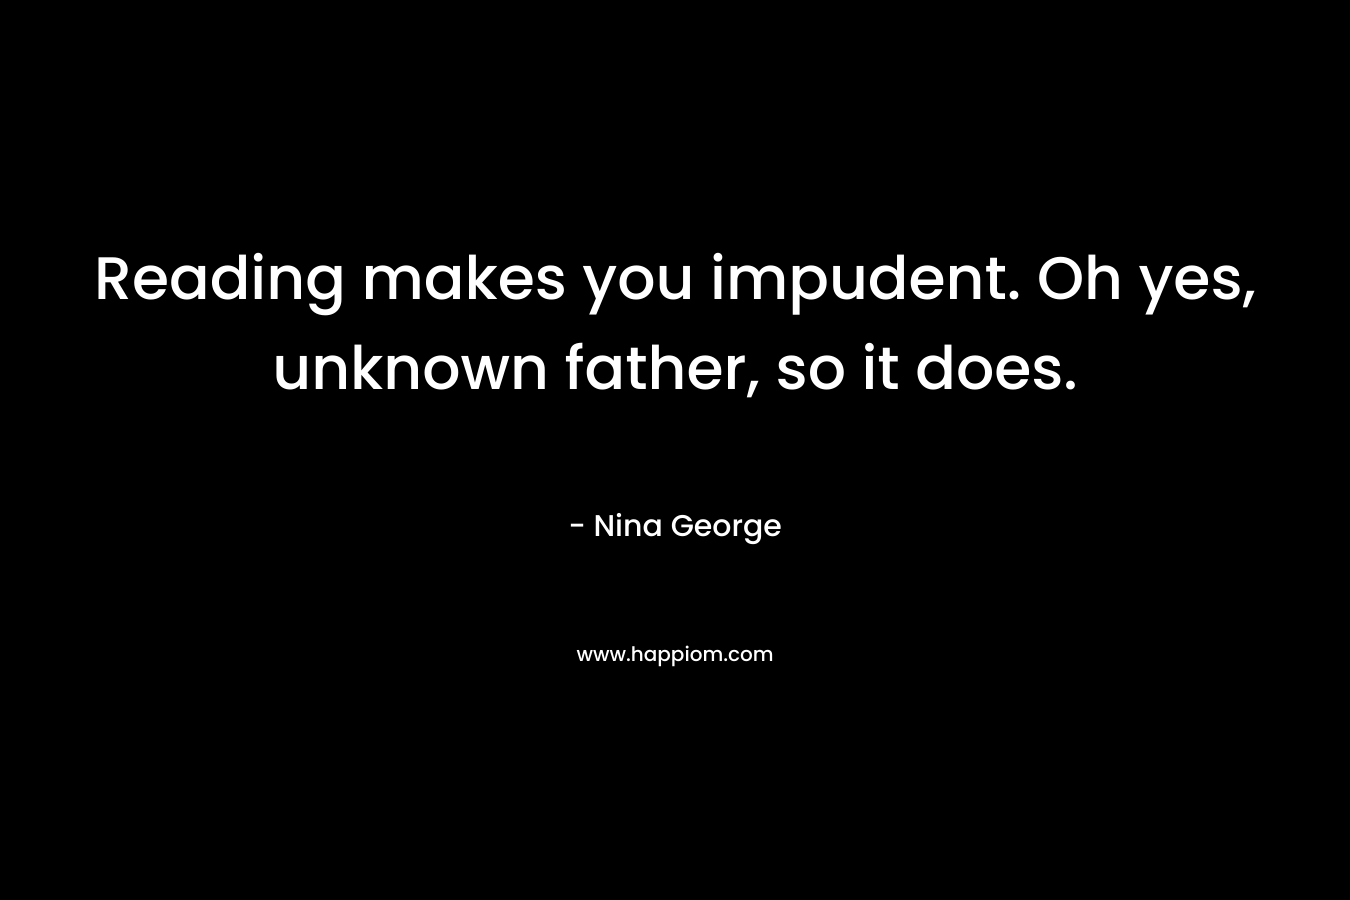 Reading makes you impudent. Oh yes, unknown father, so it does. – Nina George